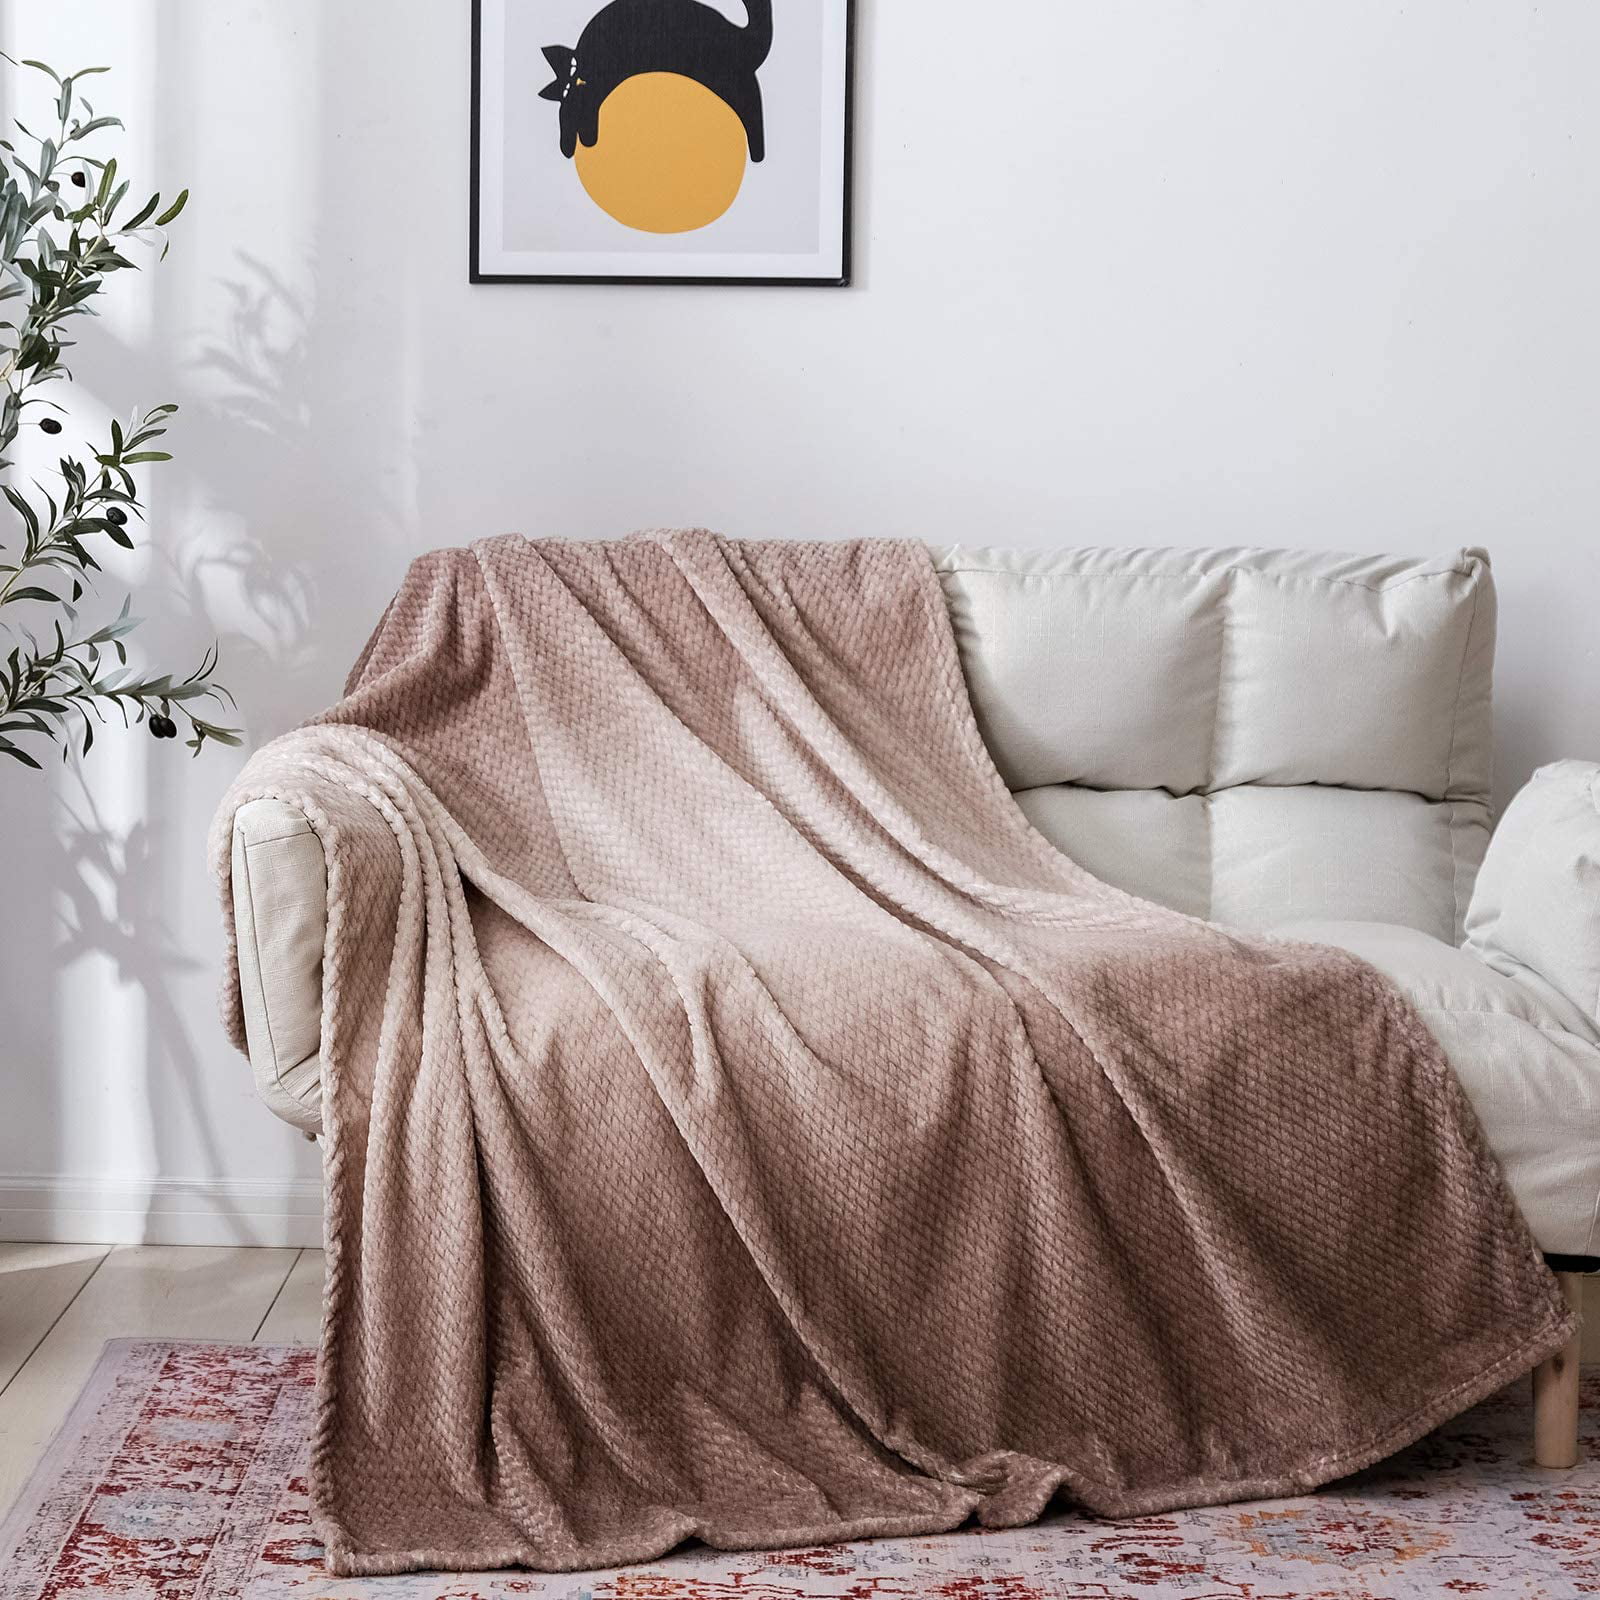 Blanket Ultra-Soft Lightweight Flannel Blanket Sofa Sofa All Season Warm and Comfortable Anti-Pilling Flannel 40x50 6 Fourth July Holiday 